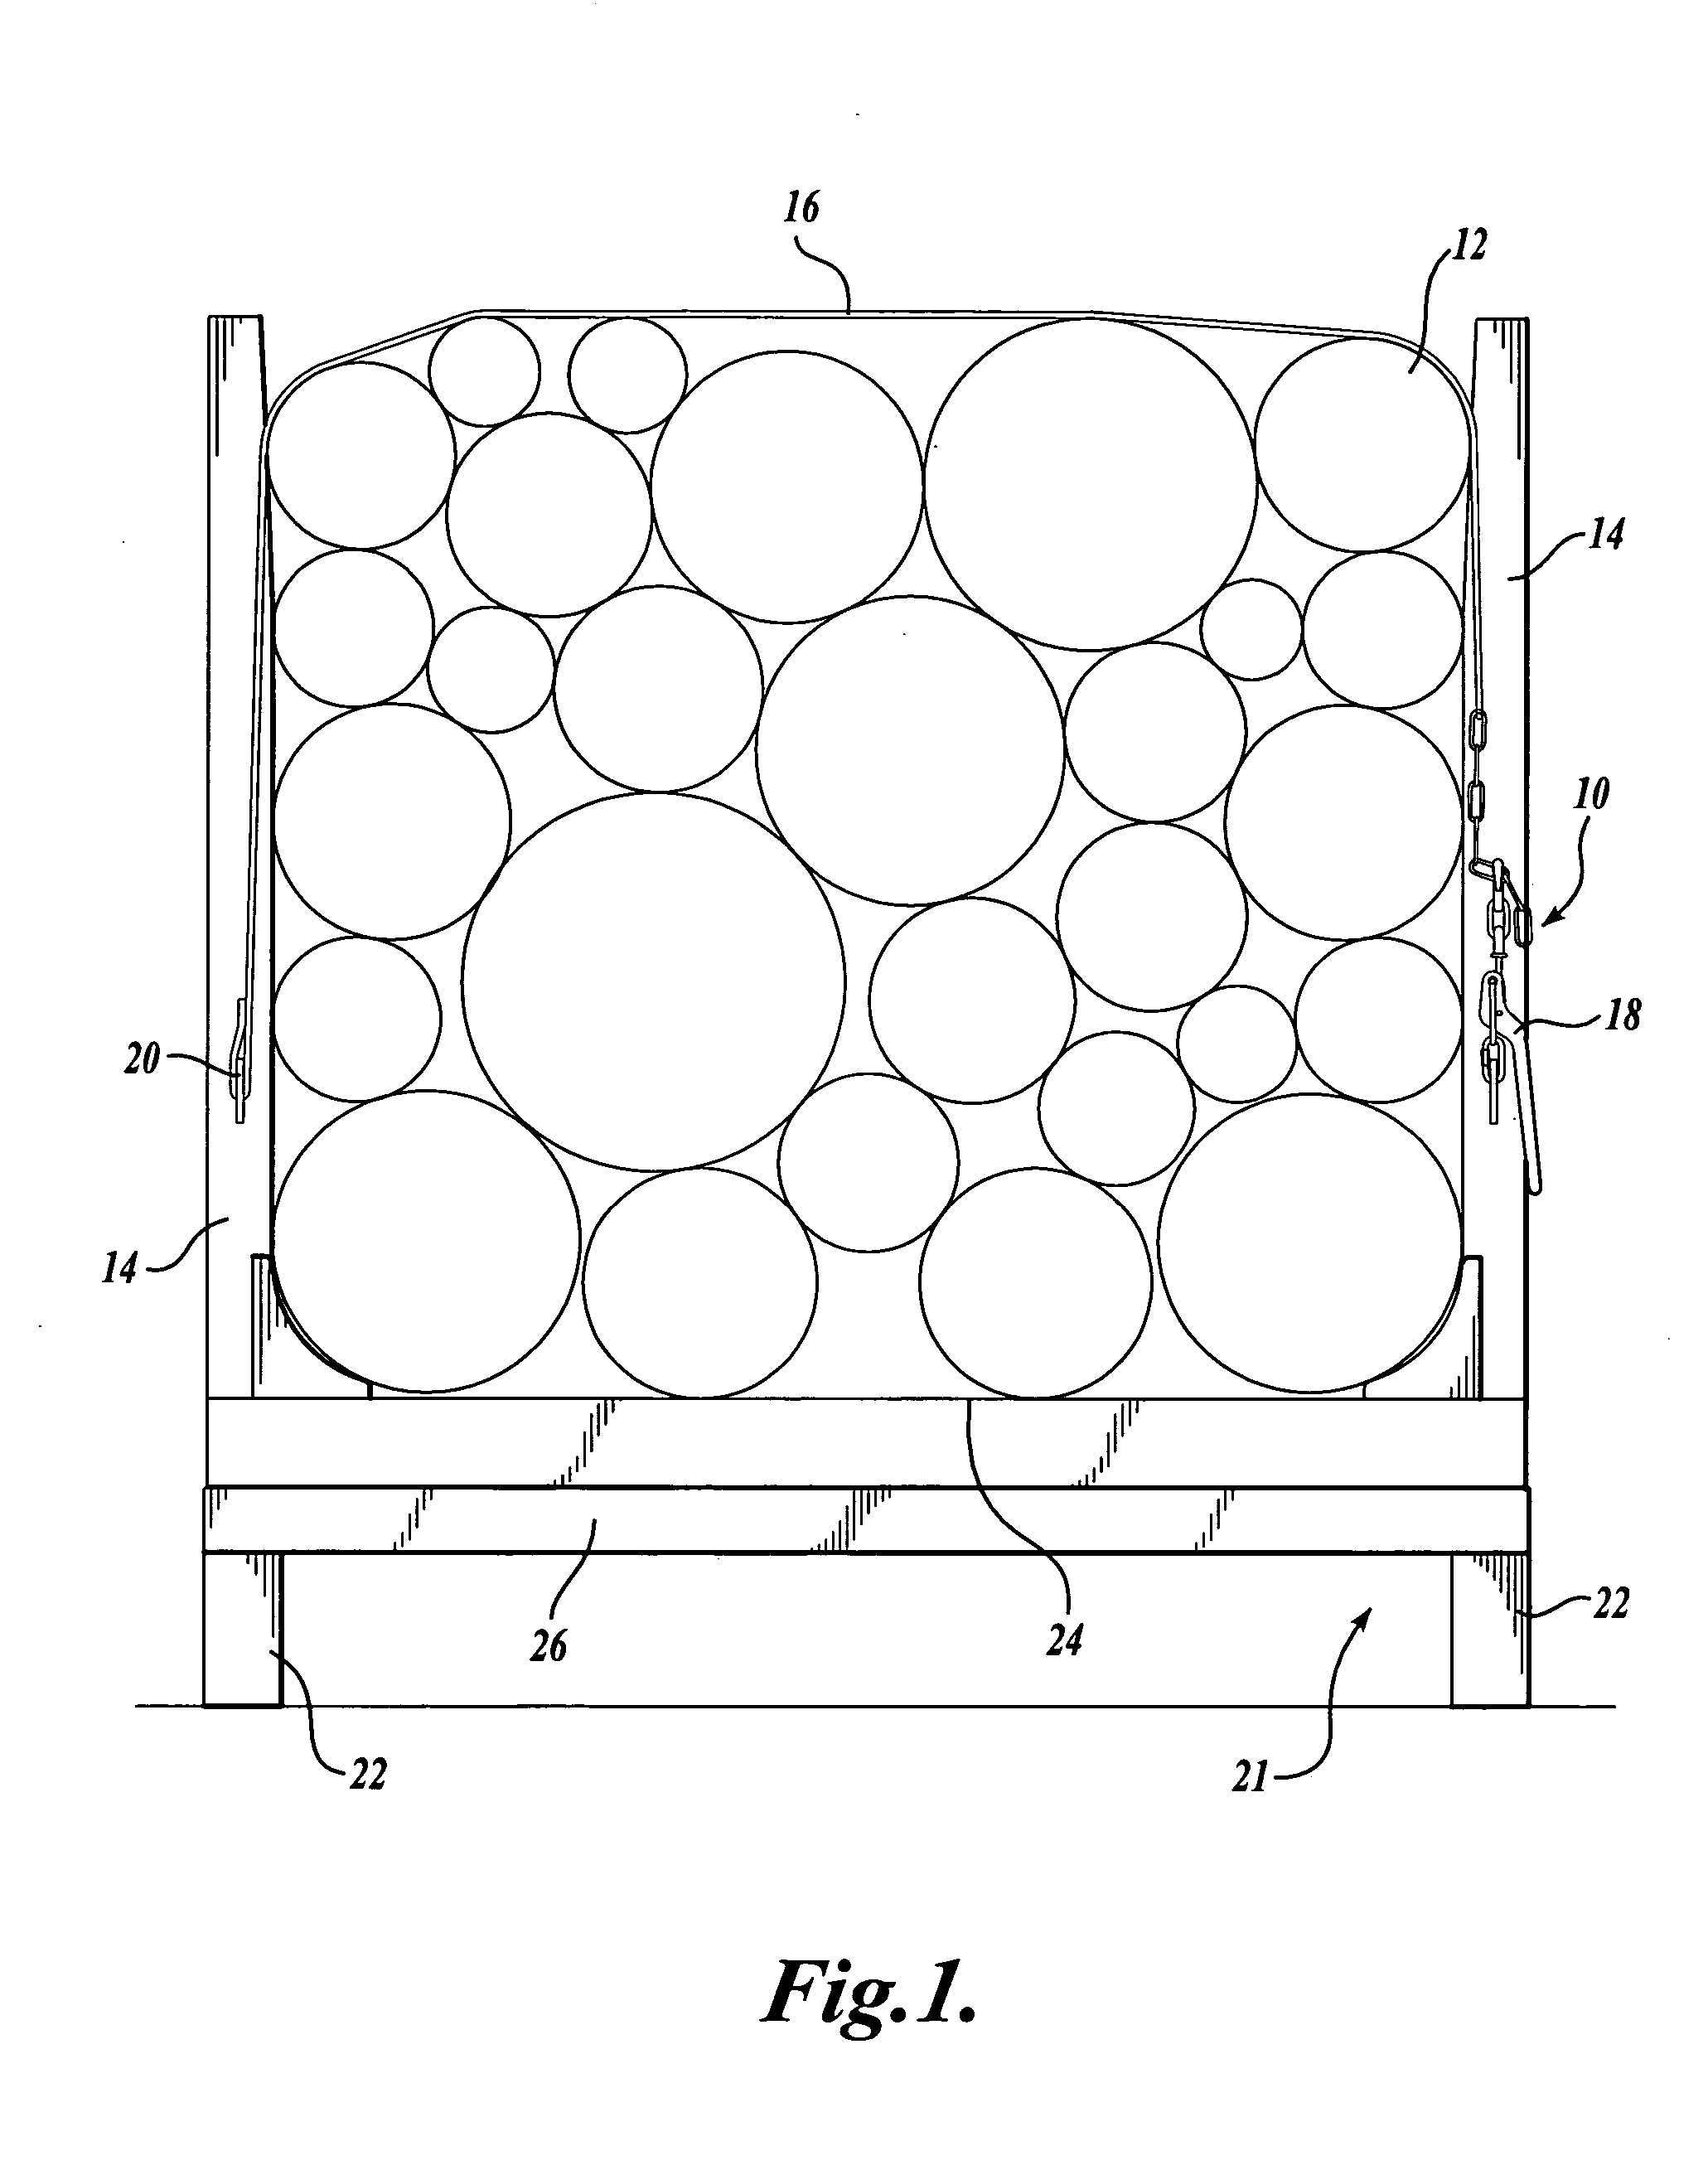 Method, apparatus and system for pre-bunking cut timber and transporting wood residuals